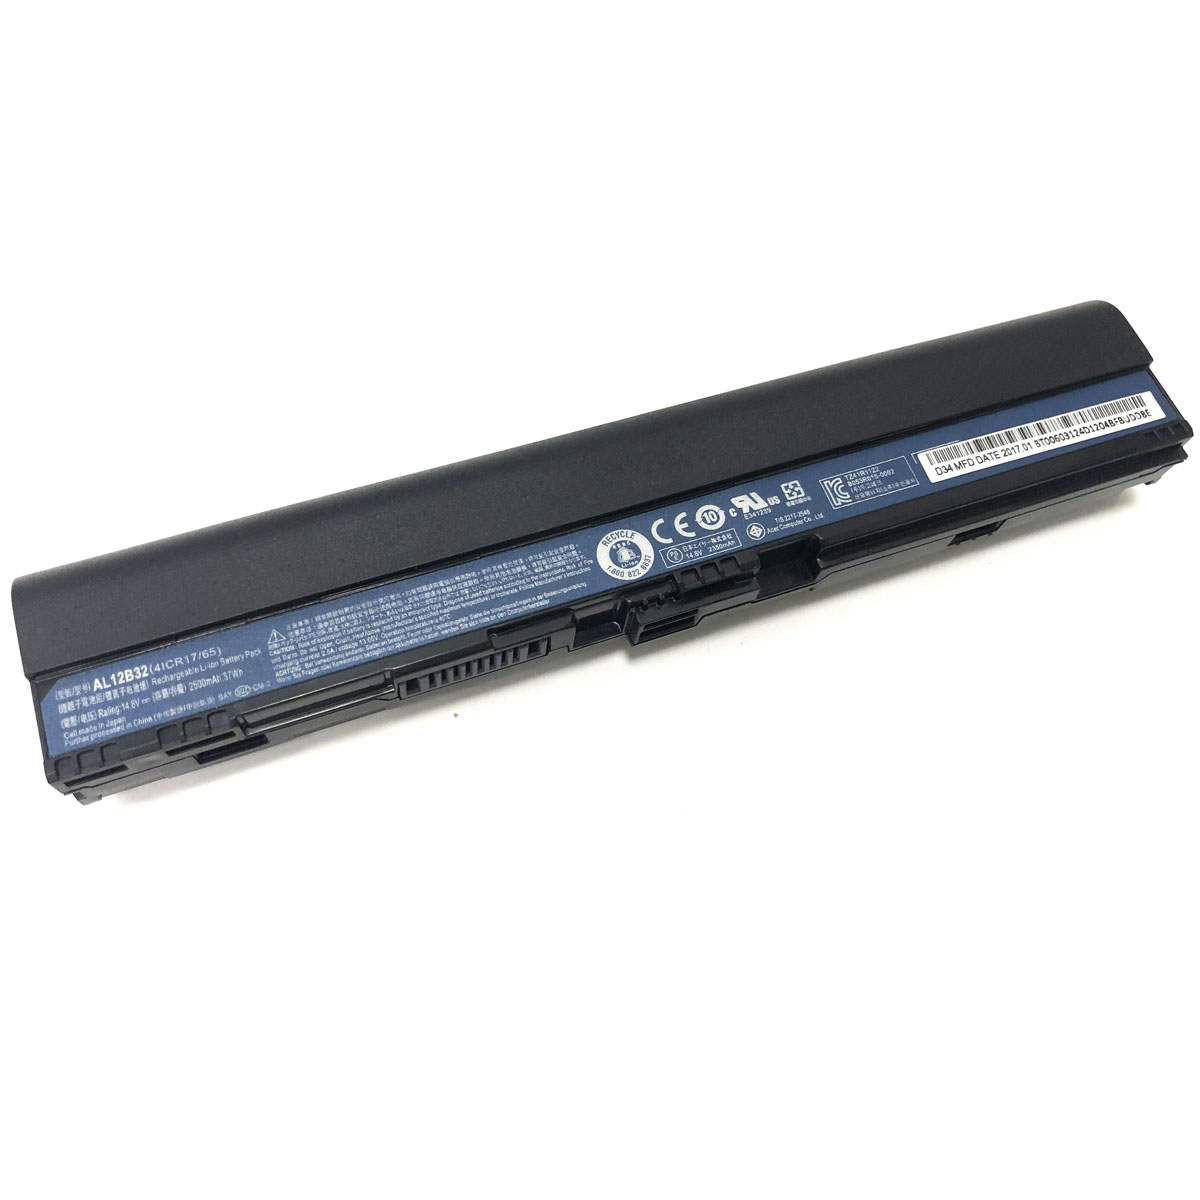 Original 37Wh Acer Aspire One 756 Series Battery